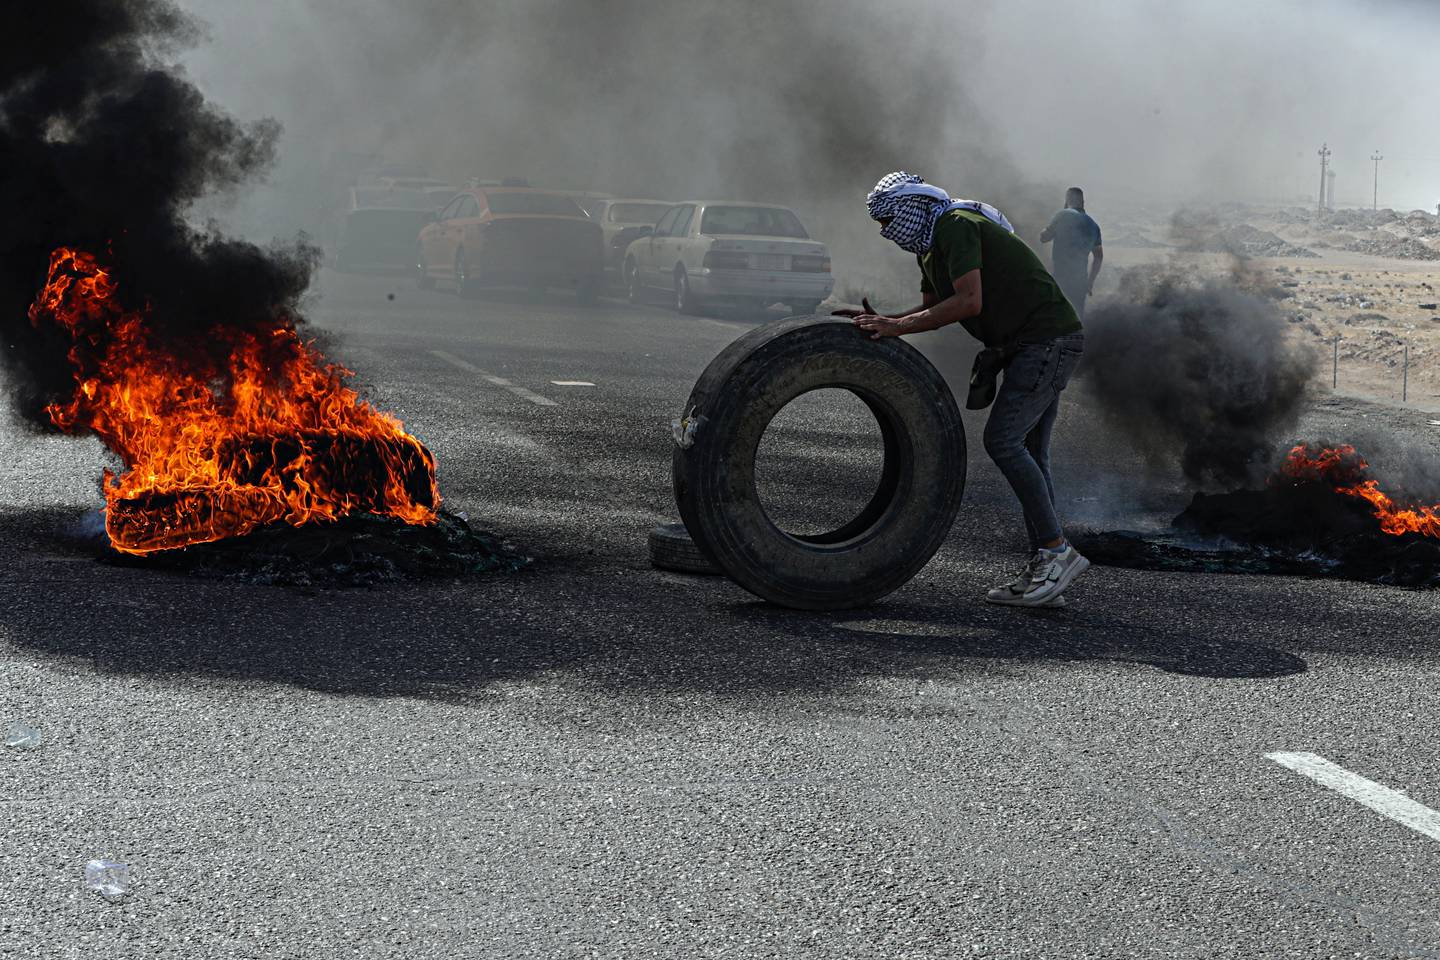 A protester burns tyres during a rally in Basra in June. AP

